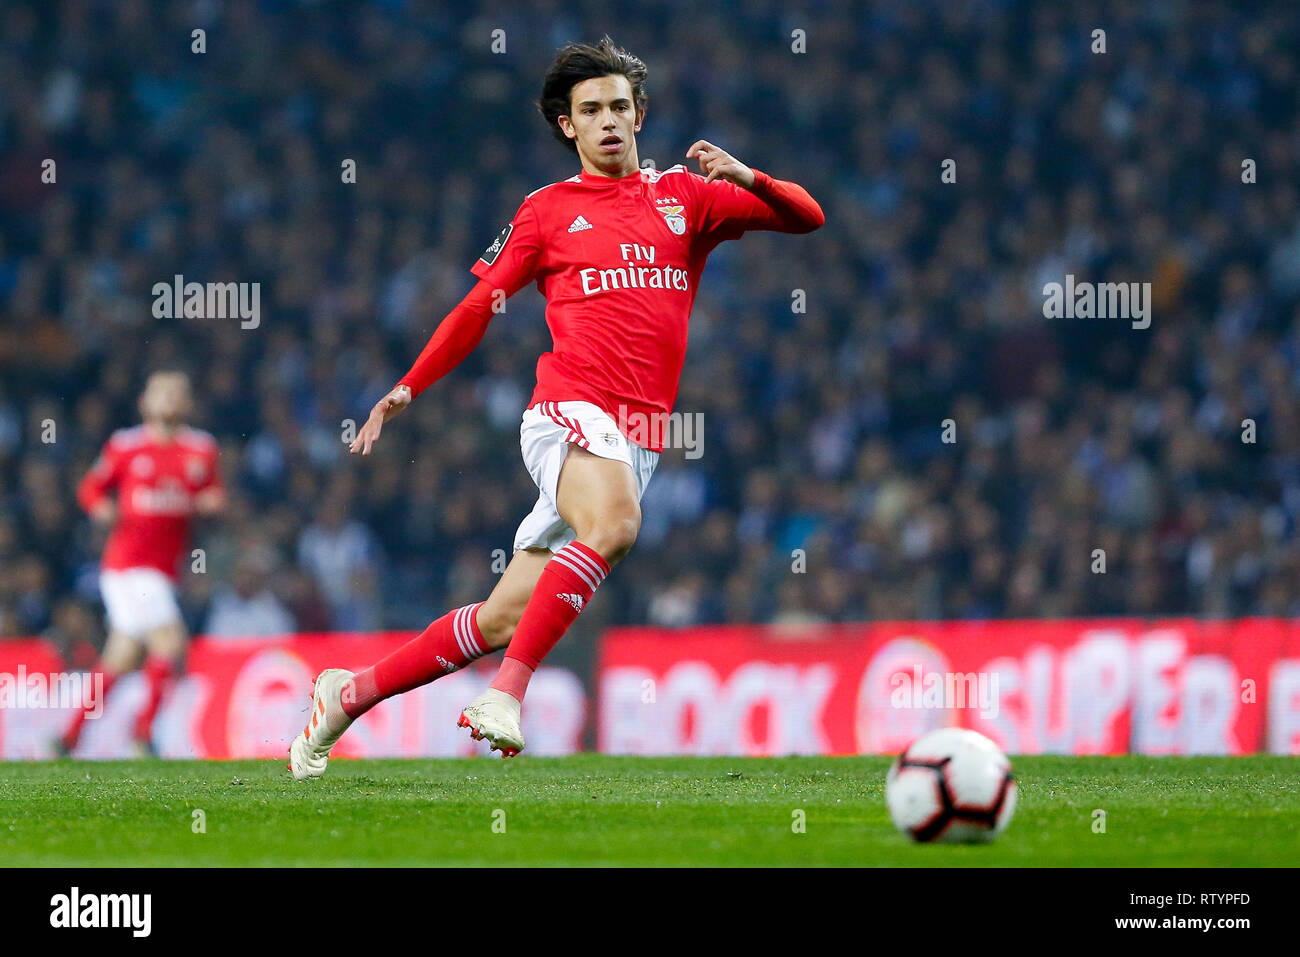 Porto, Portugal. 02nd Mar, 2019. João Félix during the match between Porto and Benfica held at Estádio do Dragão in Porto, Portugal. The match is valid for the 24th Portuguese Championship. Credit: Marco Galvão/FotoArena/Alamy Live News Stock Photo